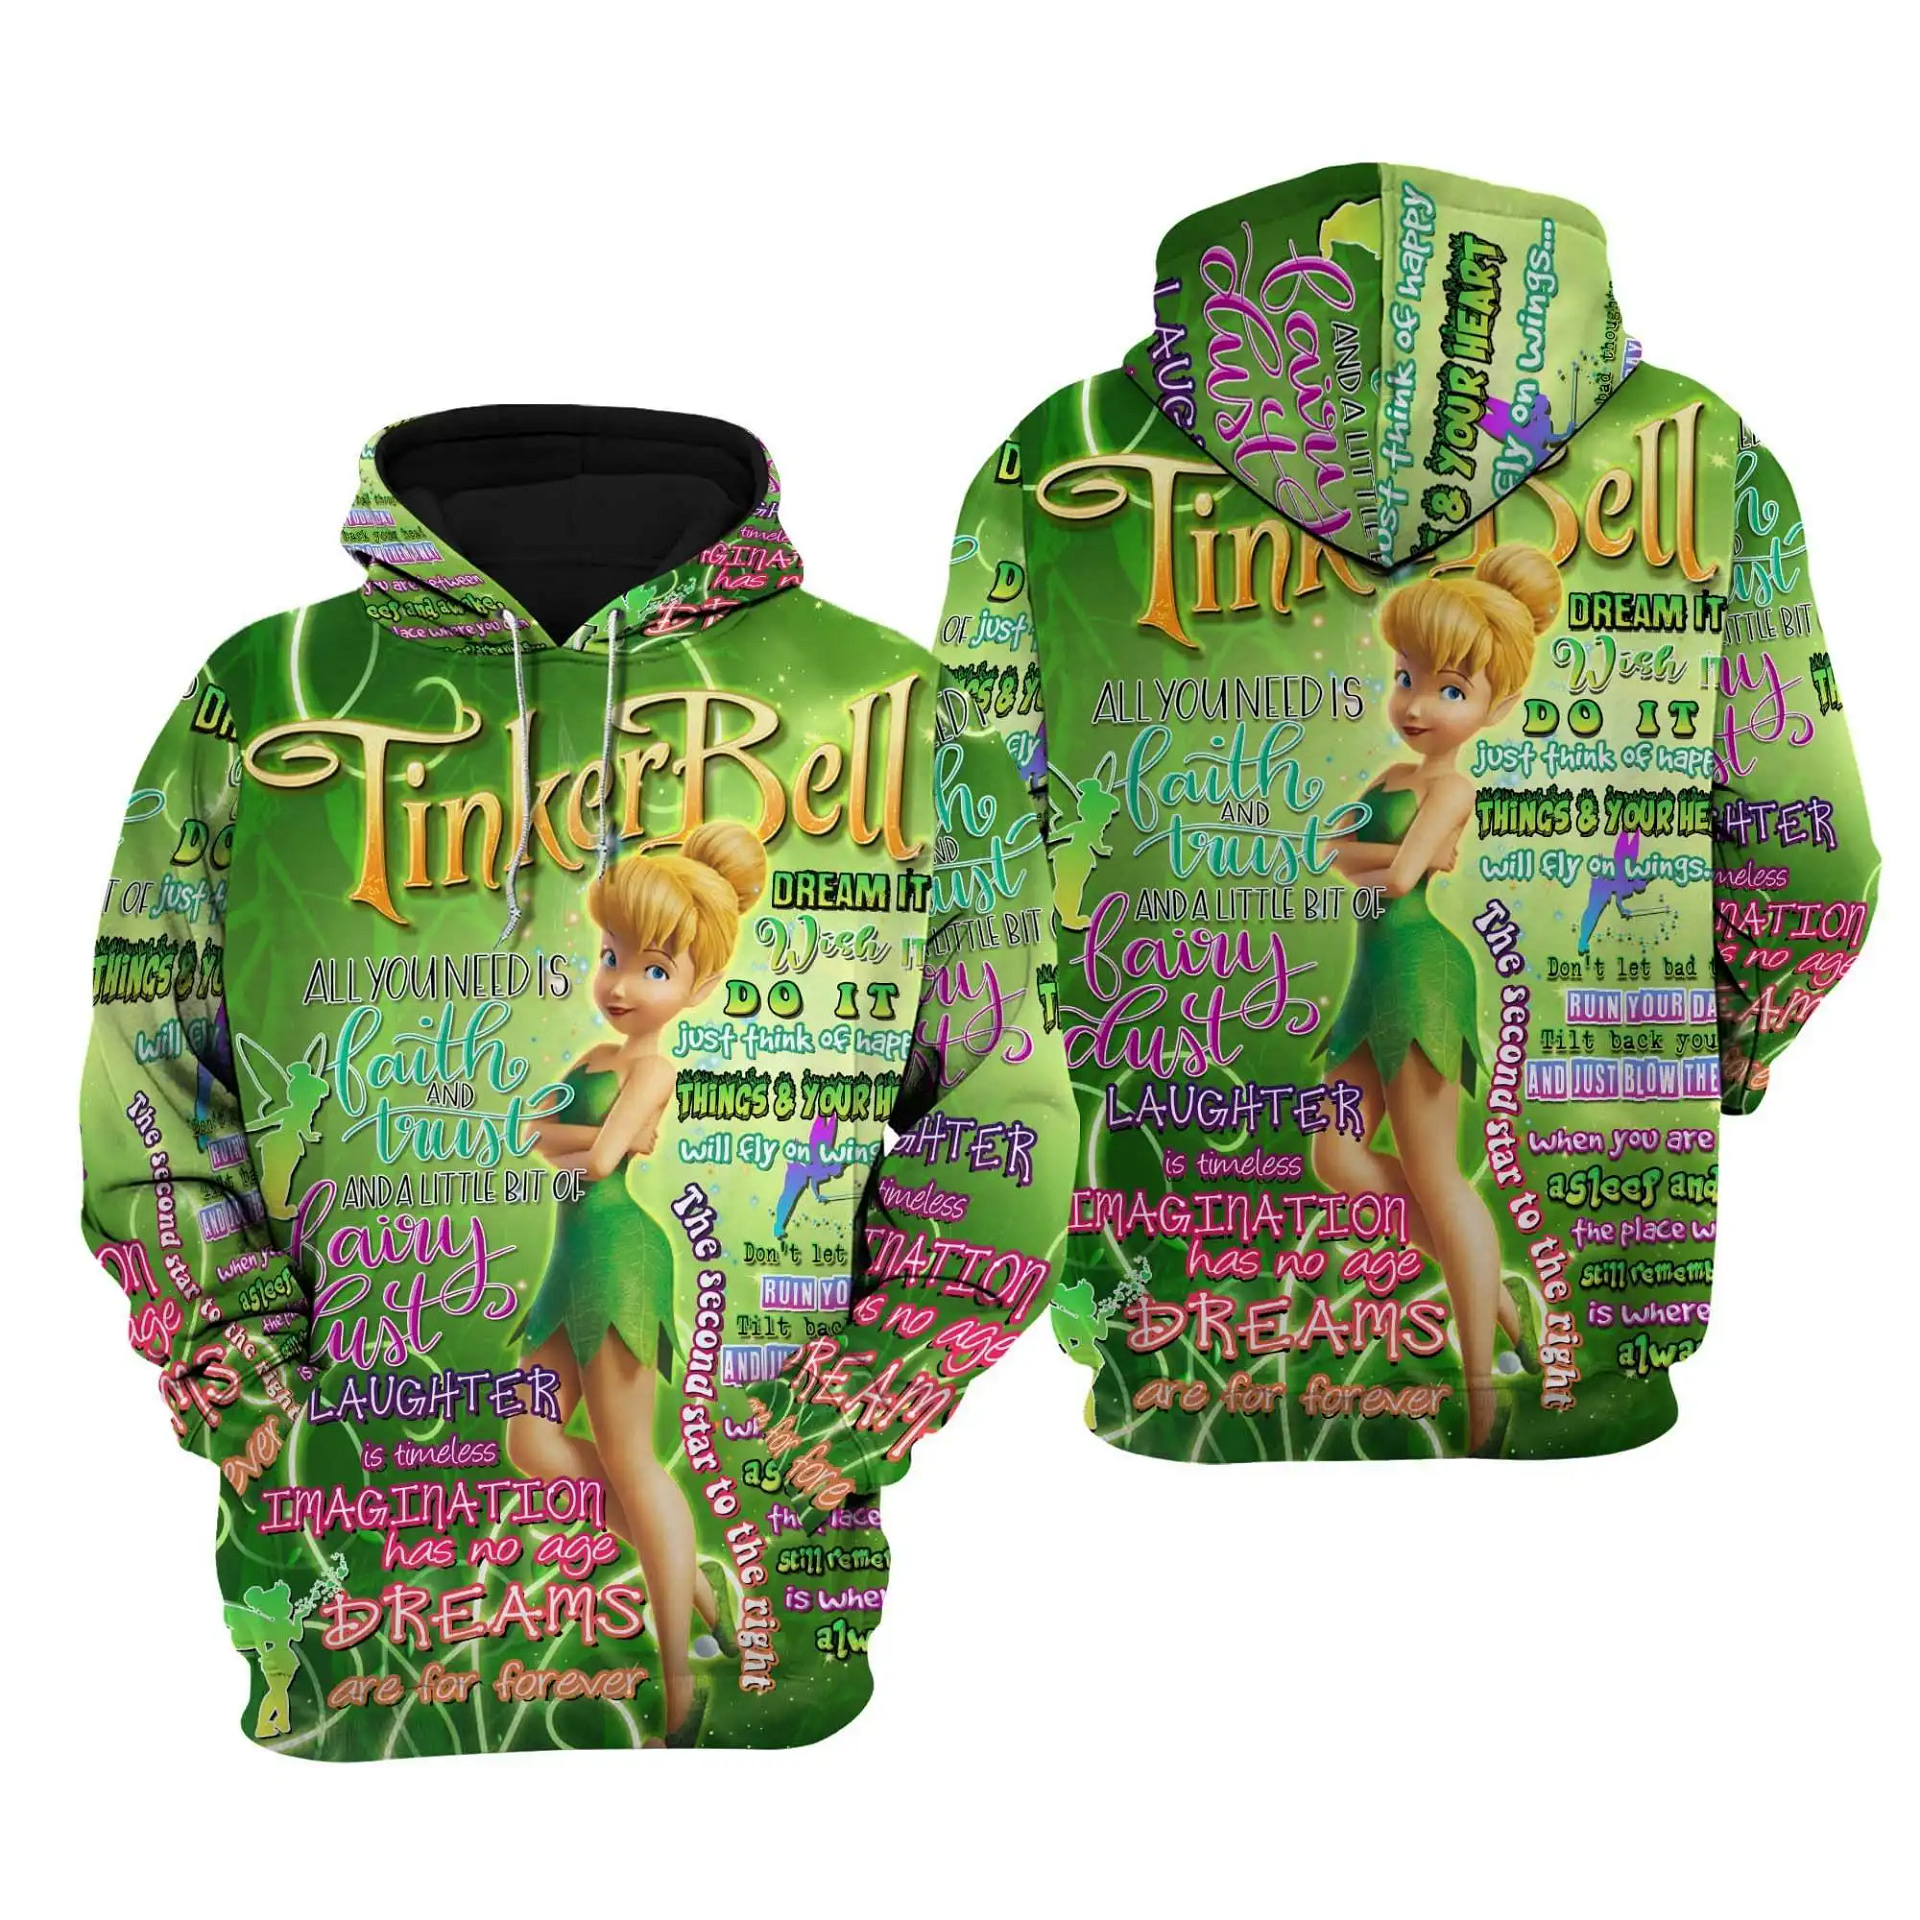 Tinker Bell Punk Words Pattern Disney Quotes Cartoon Graphic Outfits Clothing Men Women Kids Toddlers Hoodie 3D